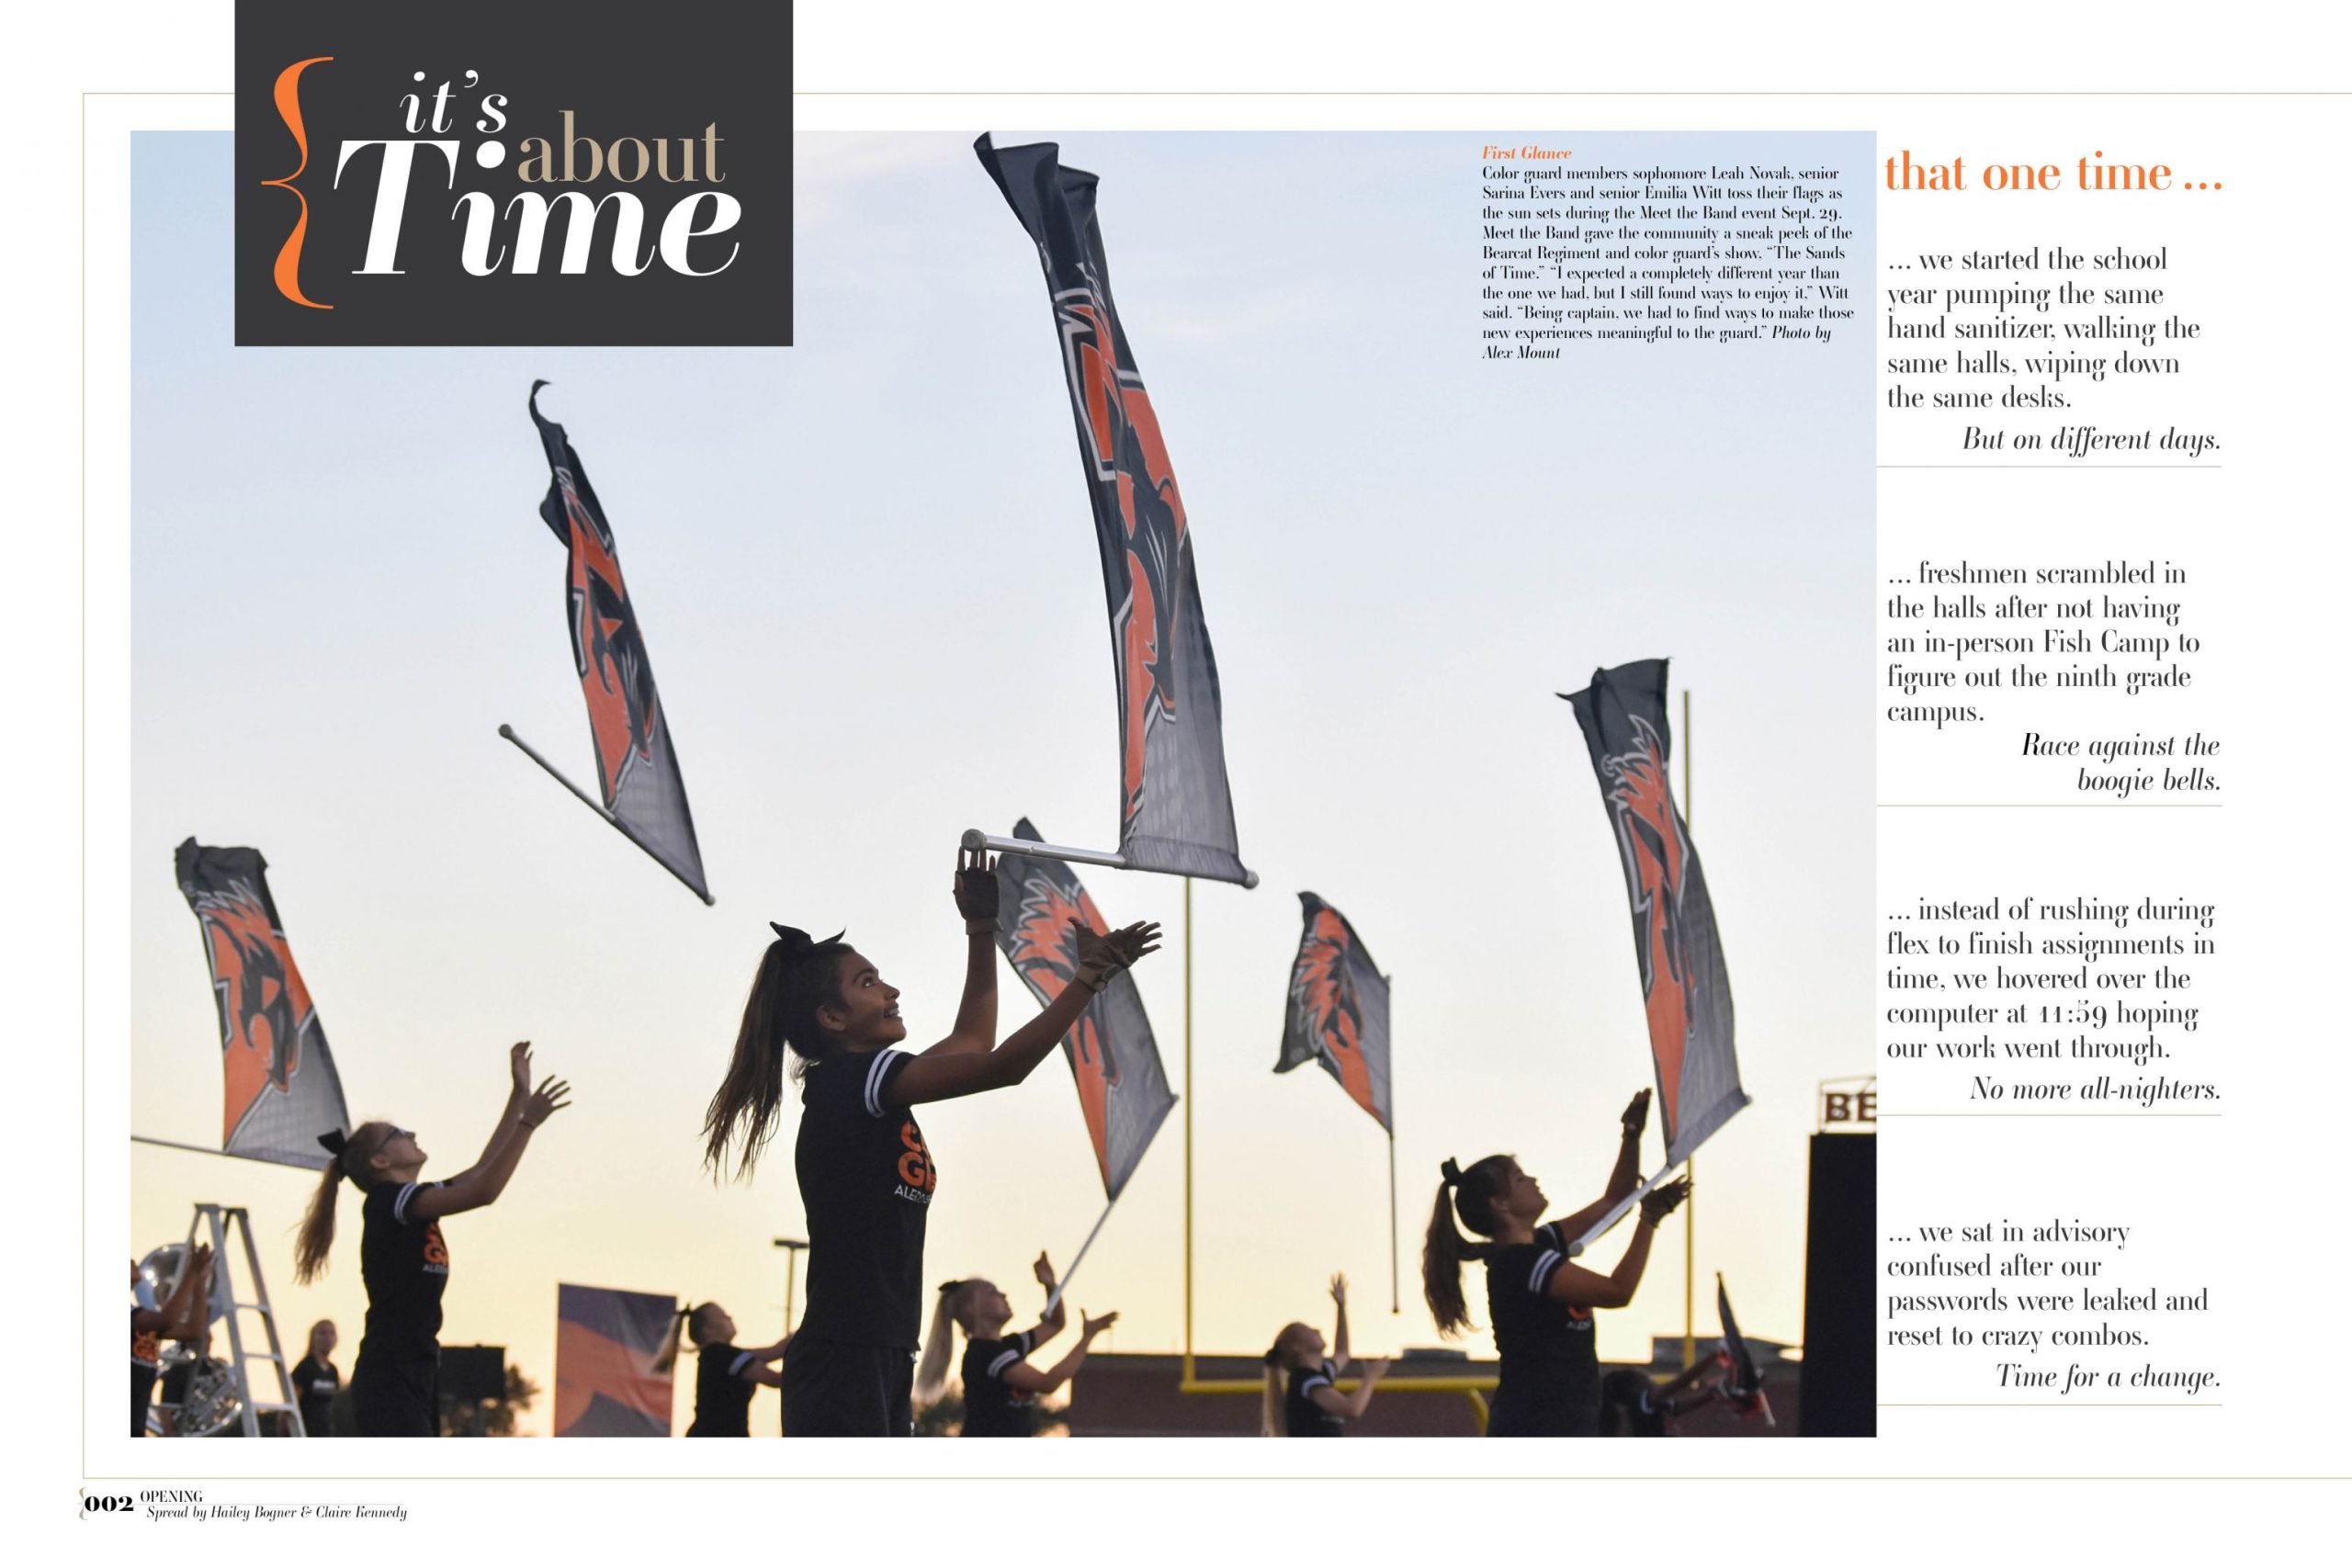 a yearbook spread with the headline "About Time"